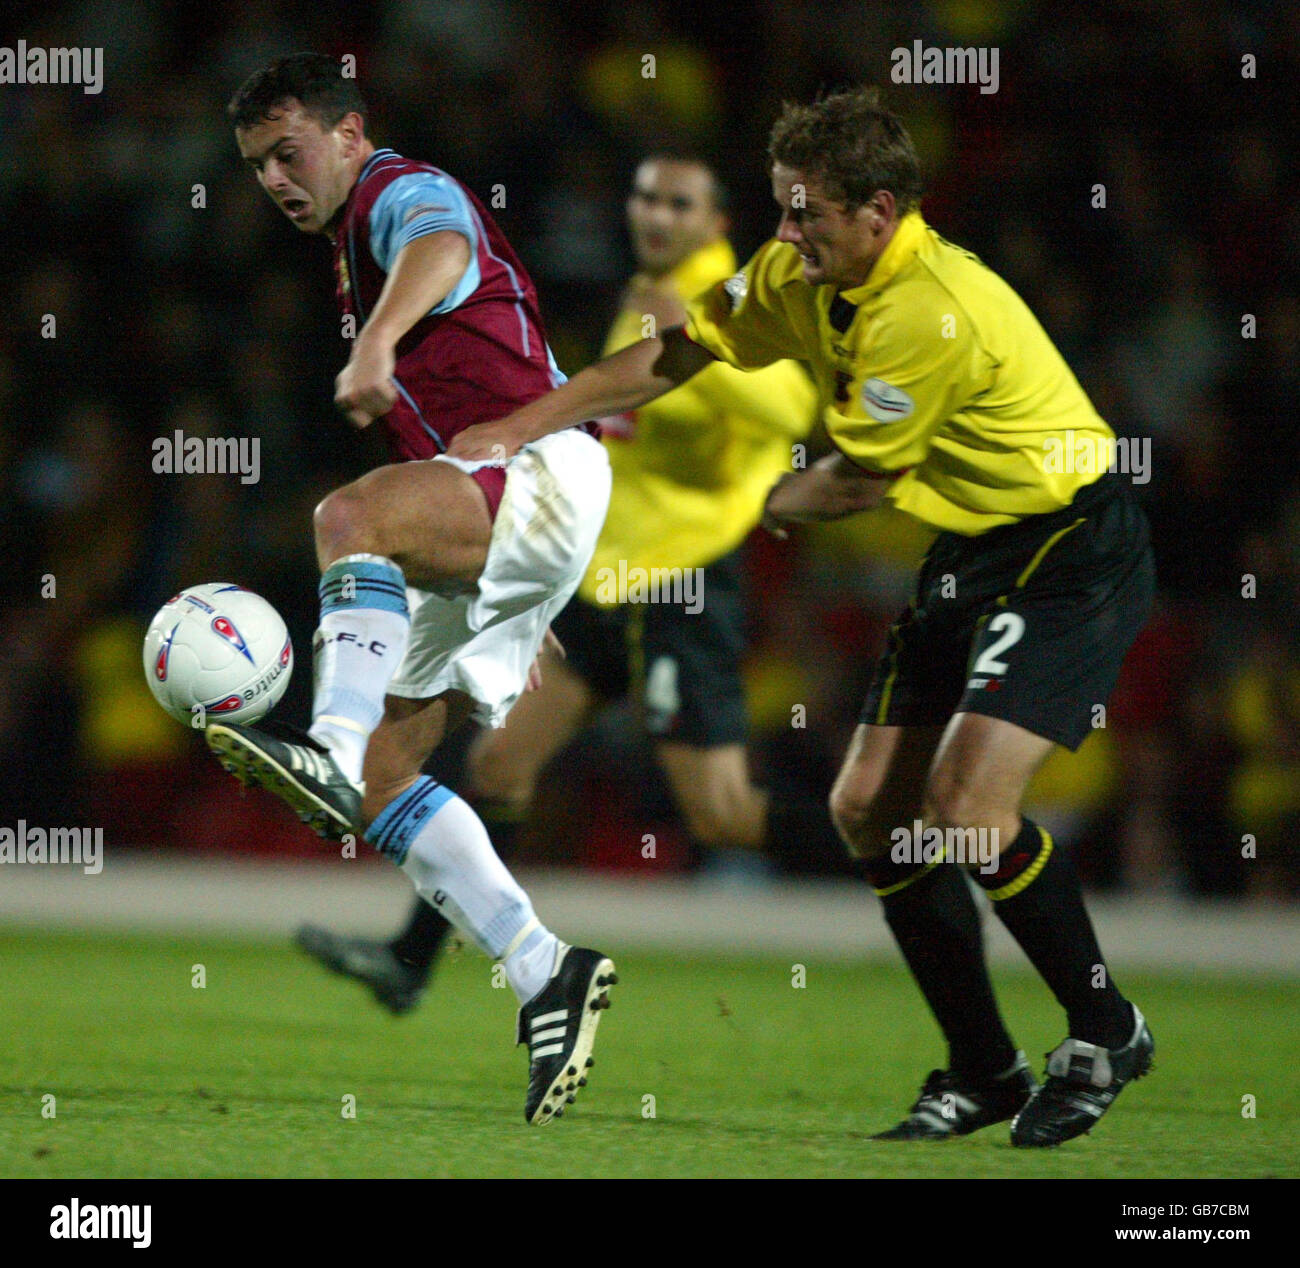 Burnley's Paul Weller and Watford's Neal Ardley battle for the ball Stock Photo